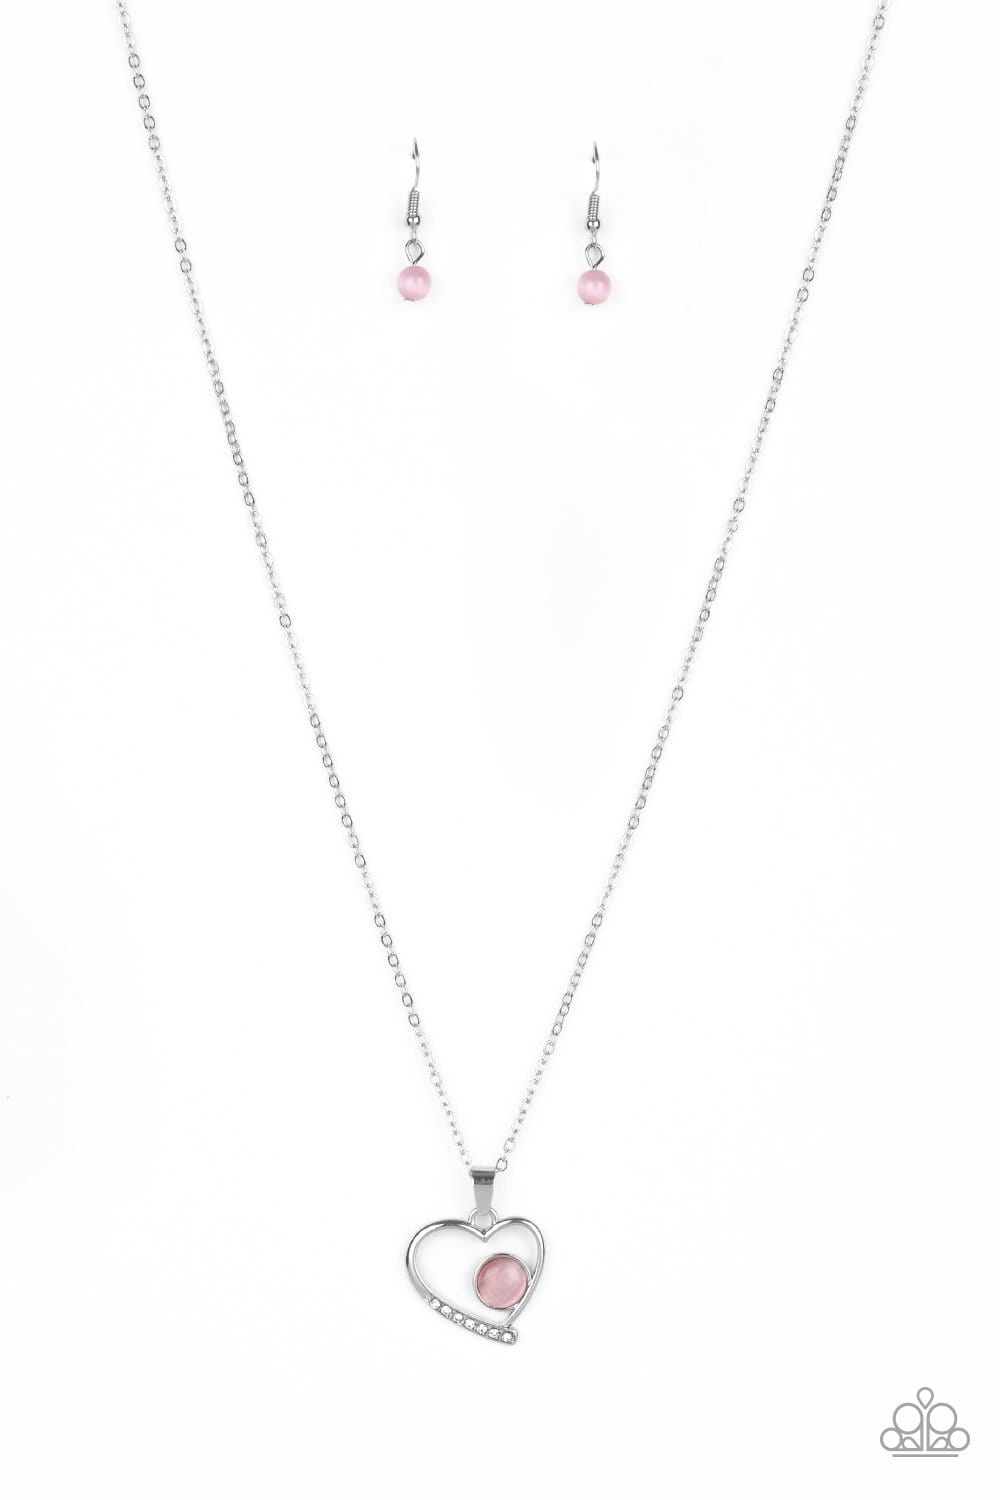 Heart Full of Love Necklaces